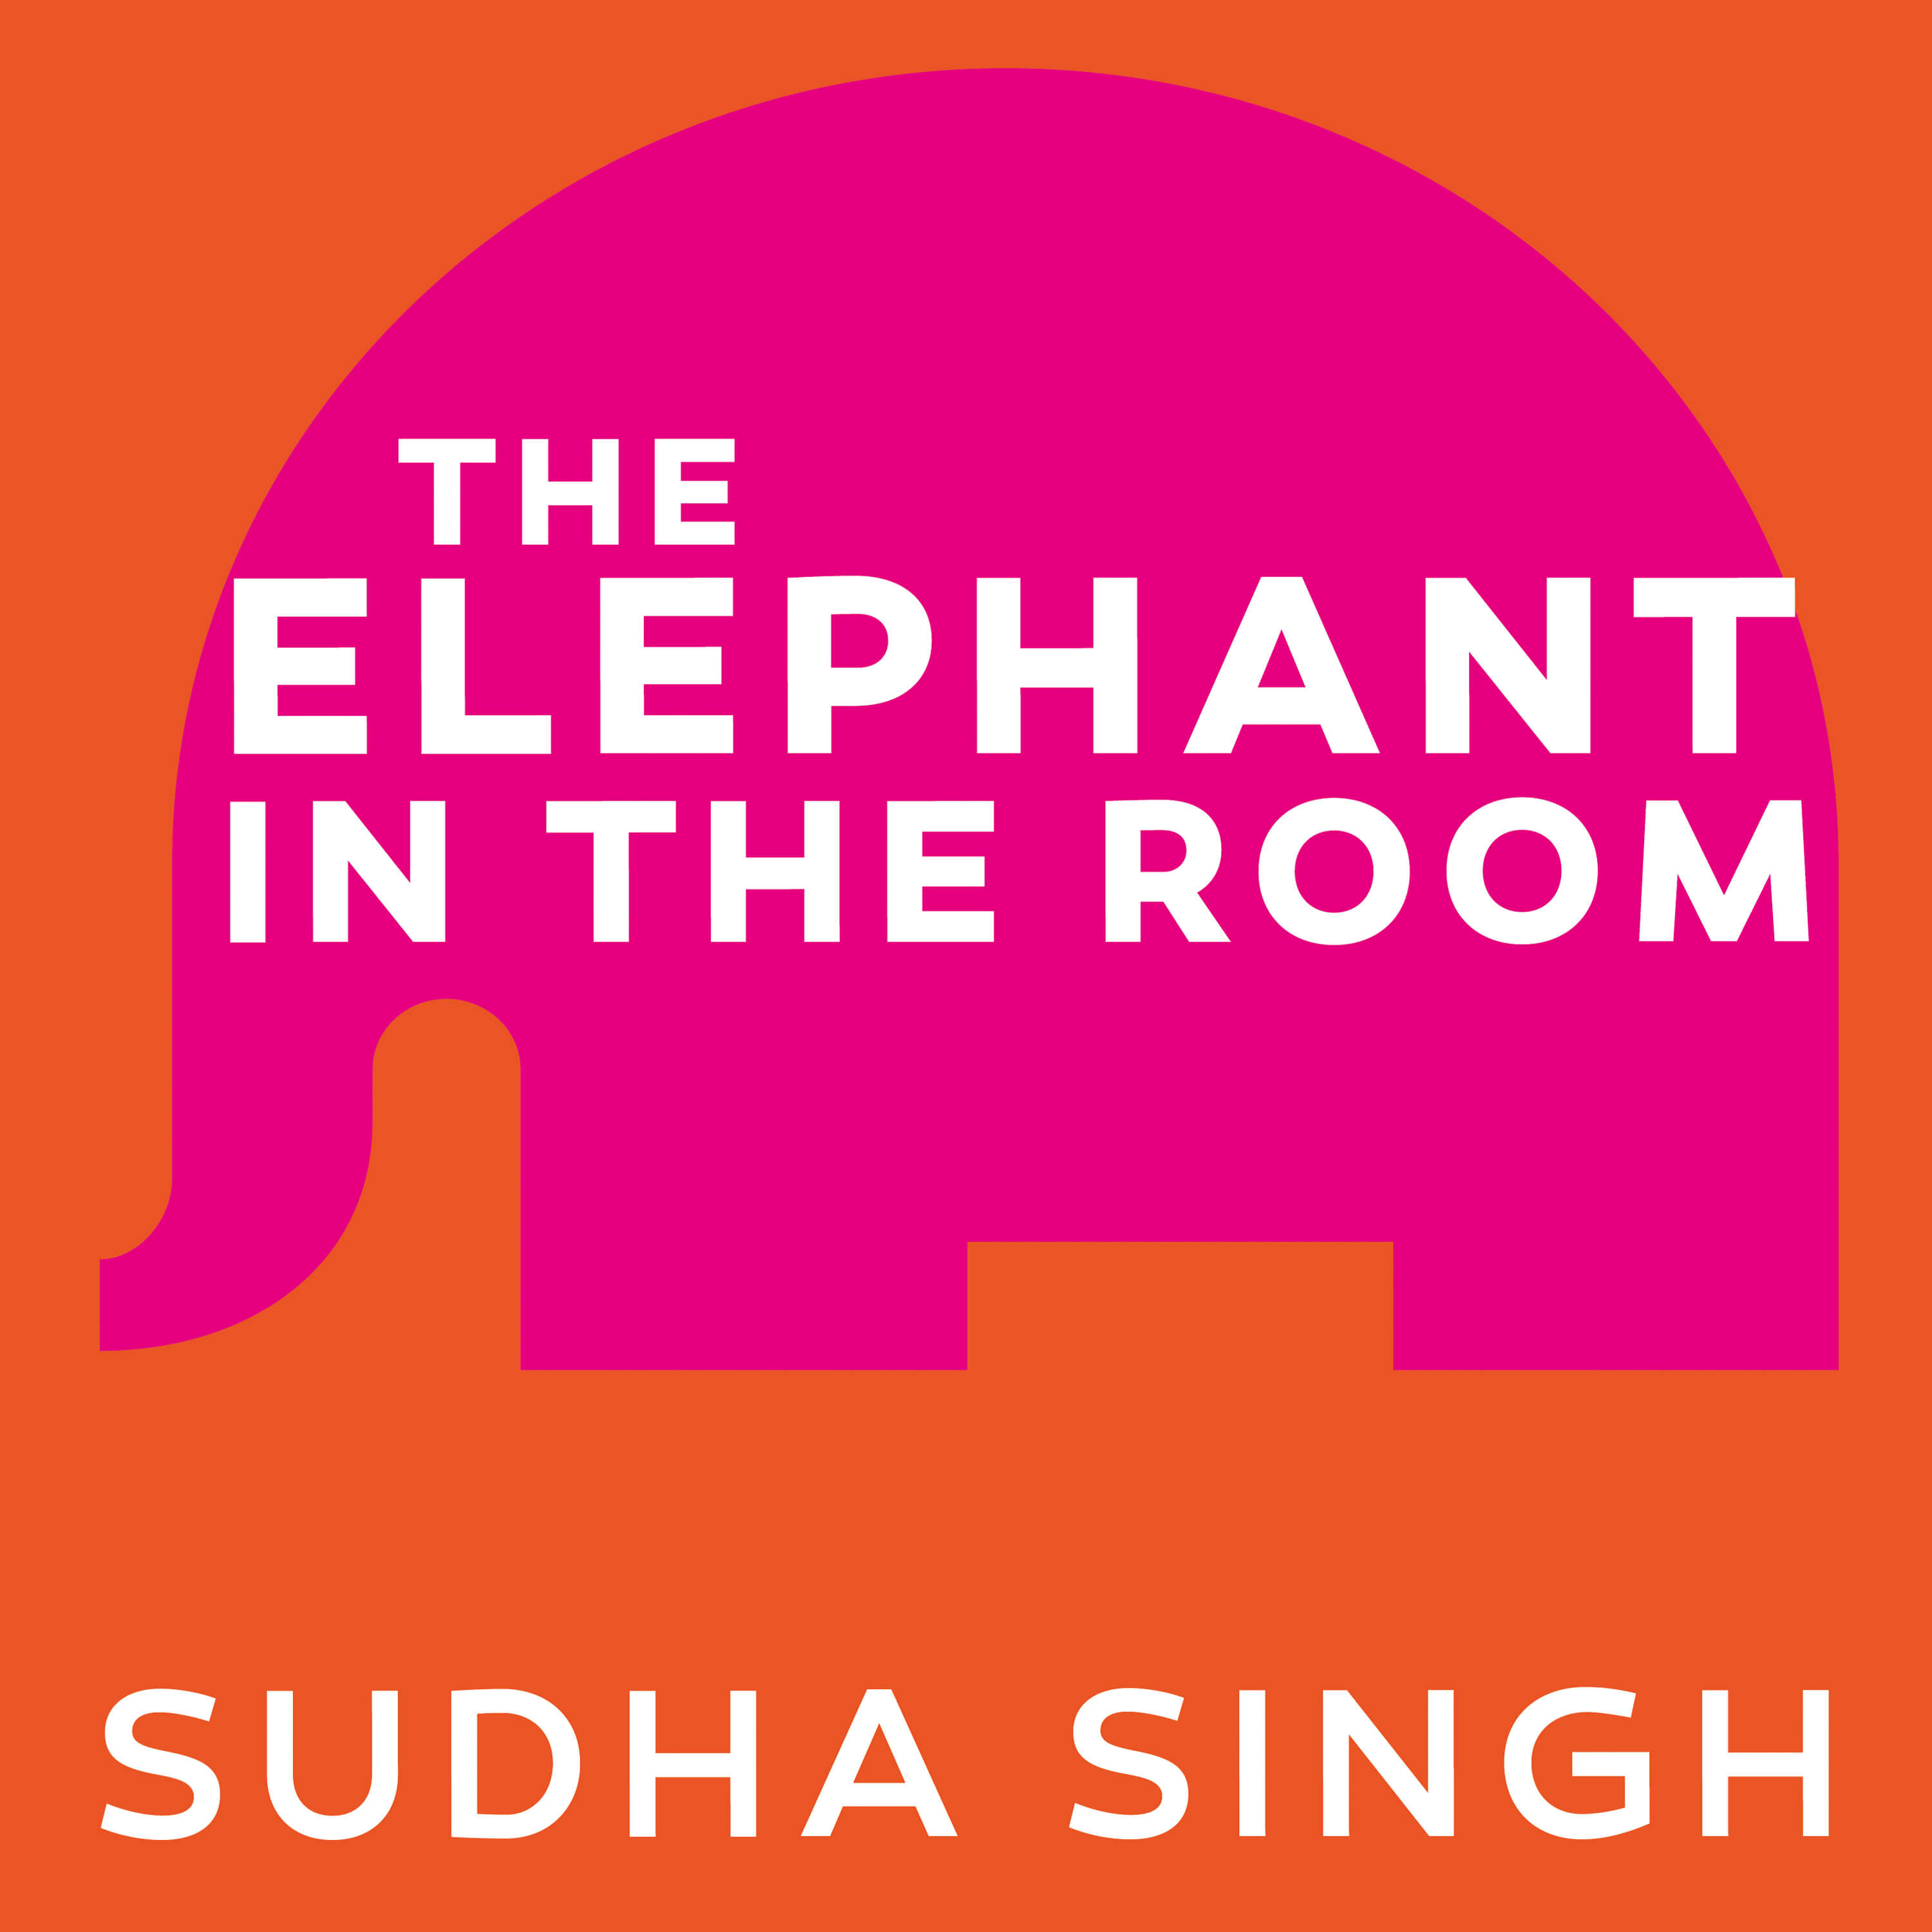 Artwork for podcast The Elephant in the Room